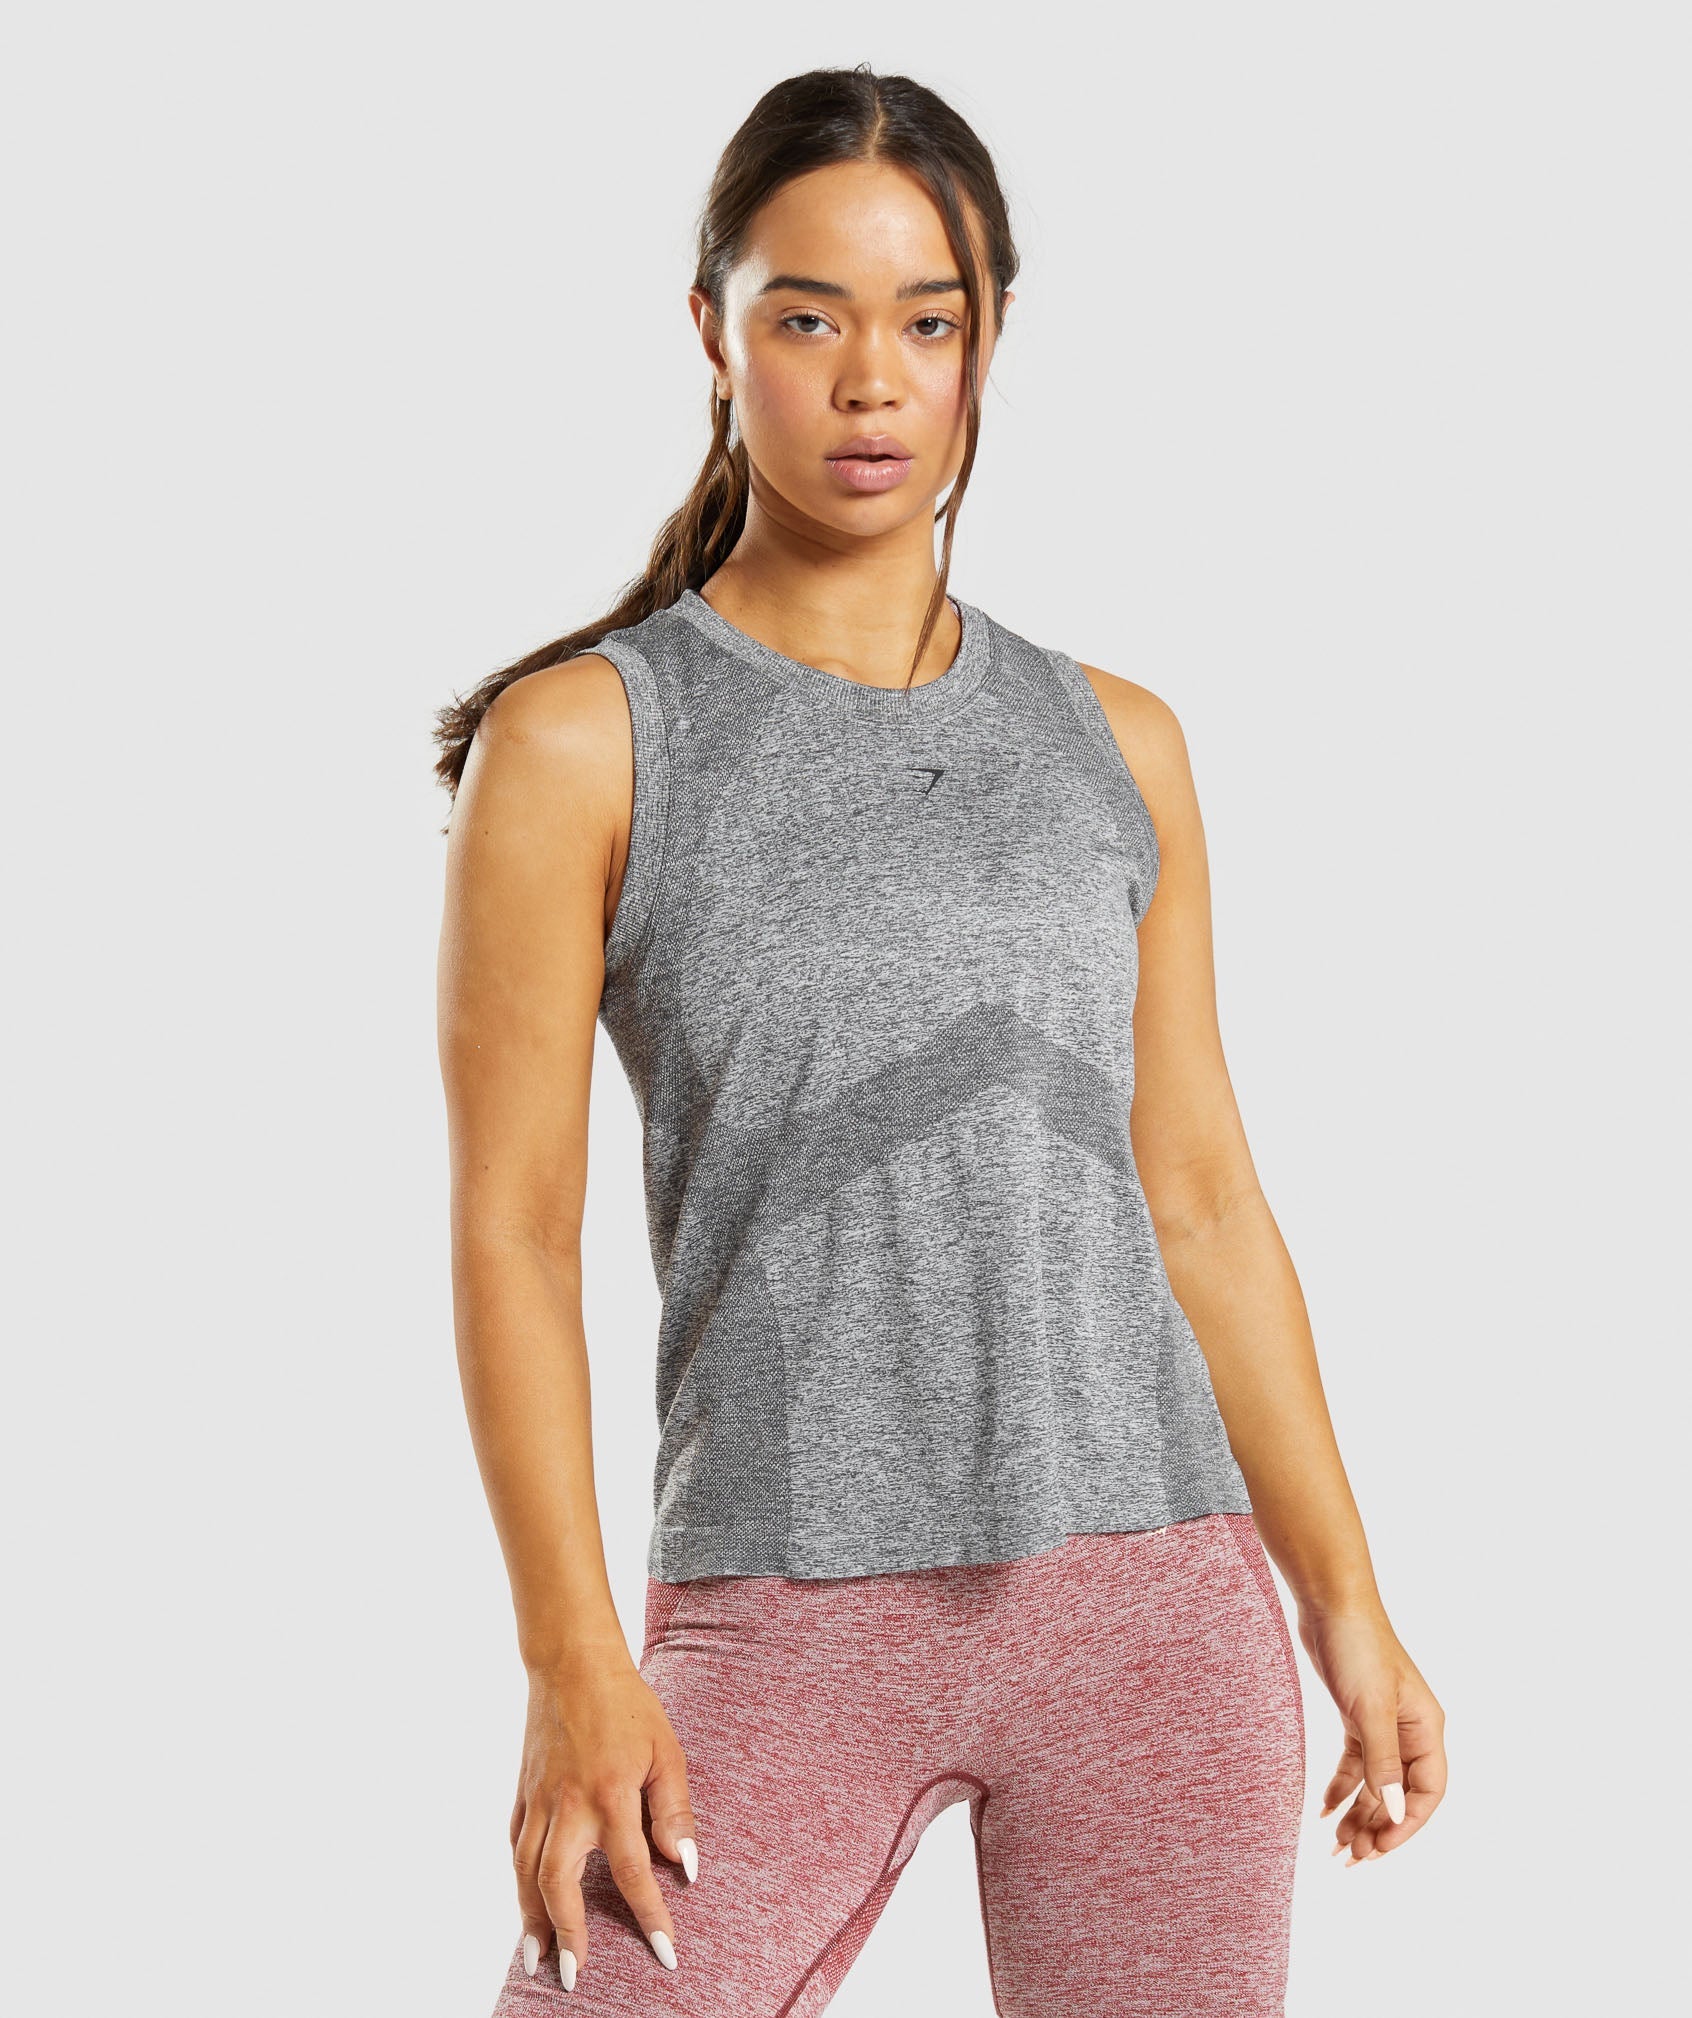 Buy Buttery Flowy Gym Tank Top in Charcoal Black Online - Life & Jam